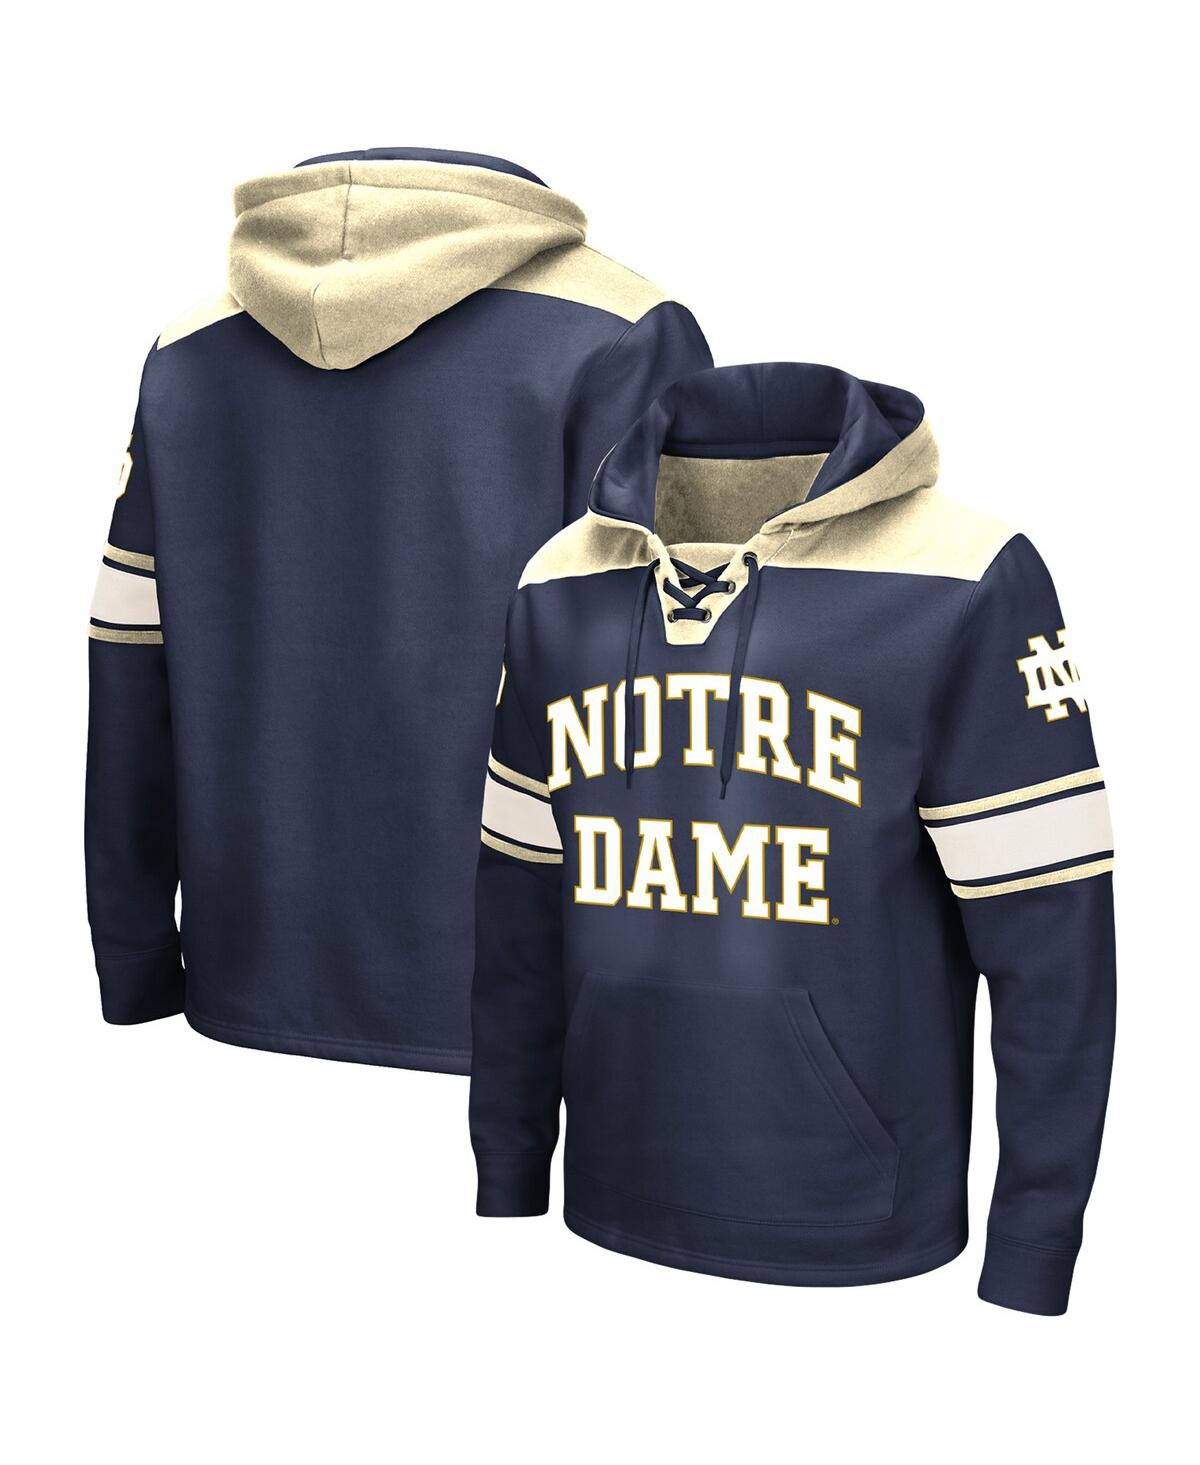 Men's Colosseum Navy Notre Dame Fighting Irish Big and Tall Hockey Lace-Up Pullover Hoodie - Navy